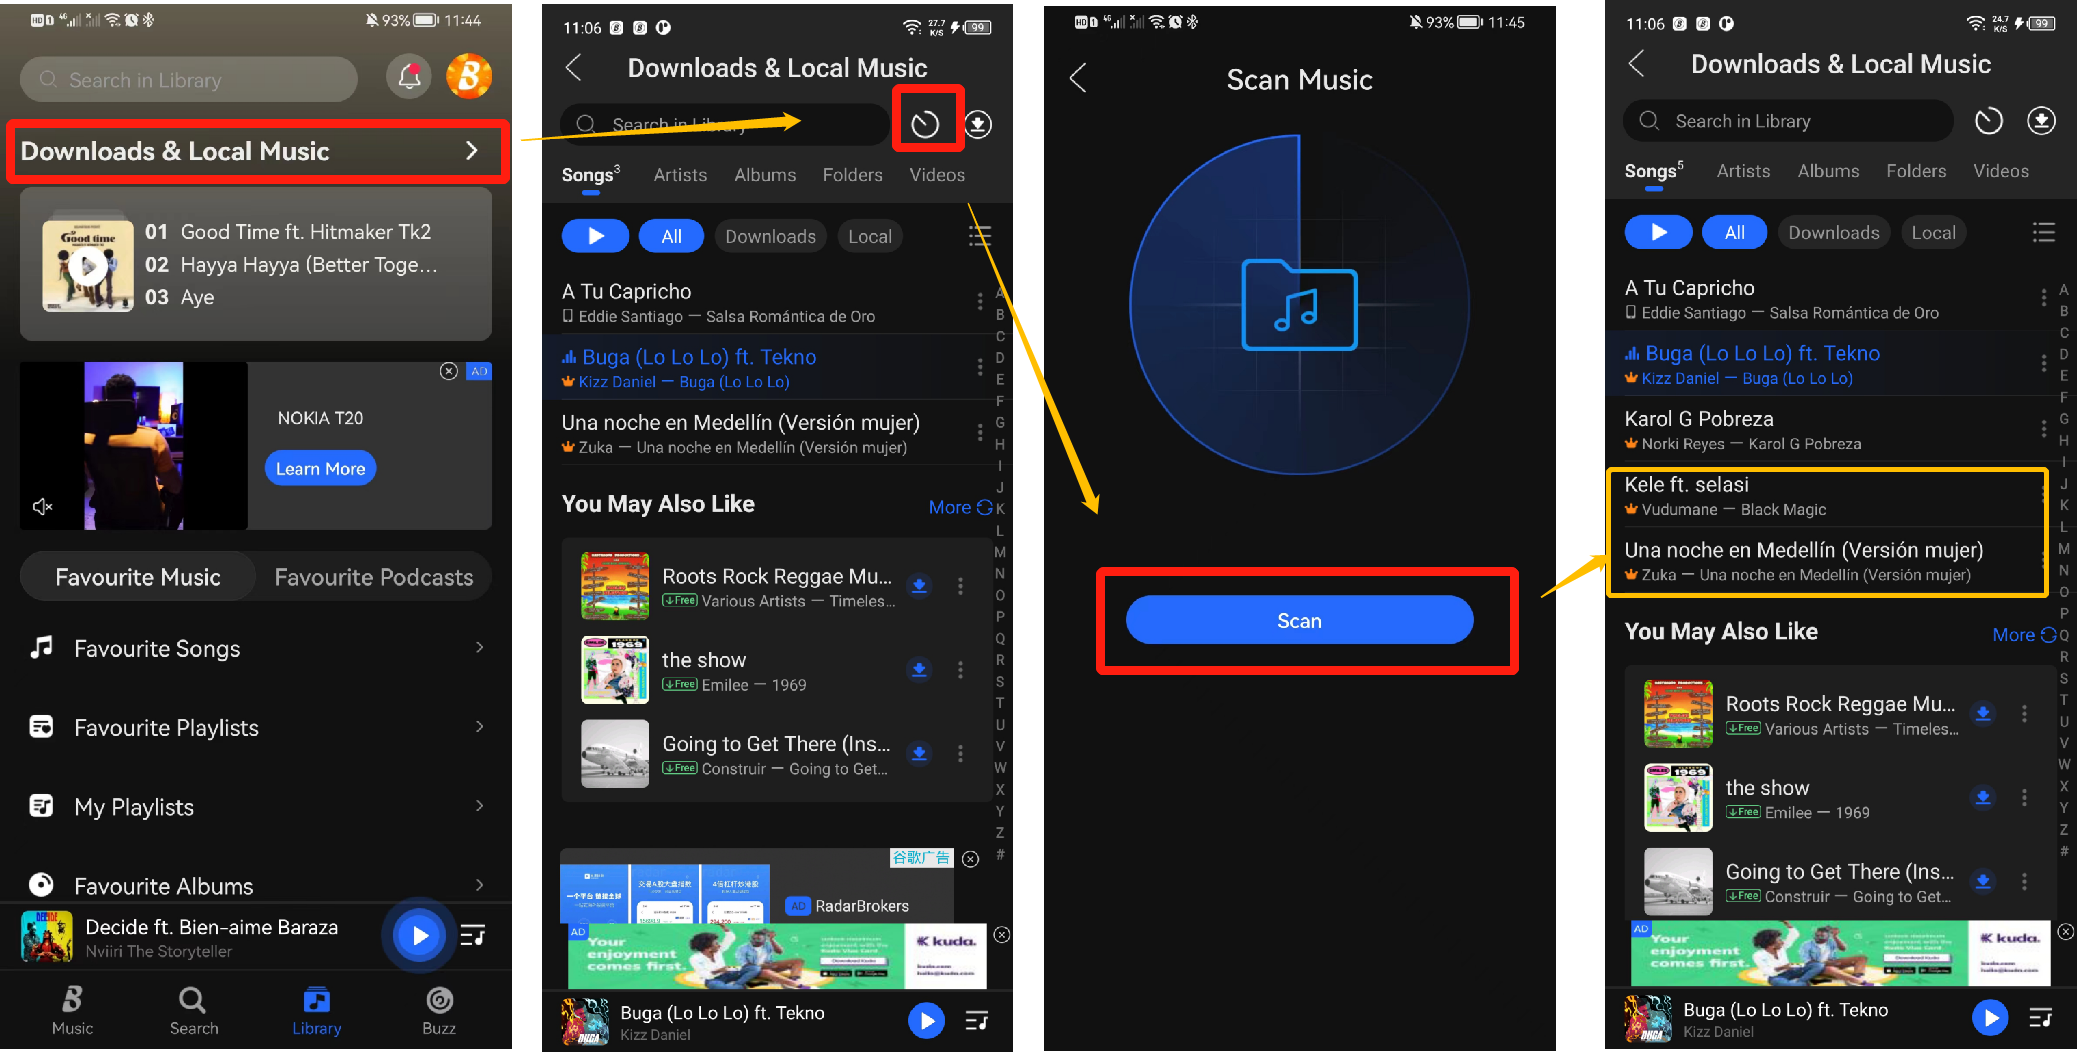 Share downloaded songs with other users